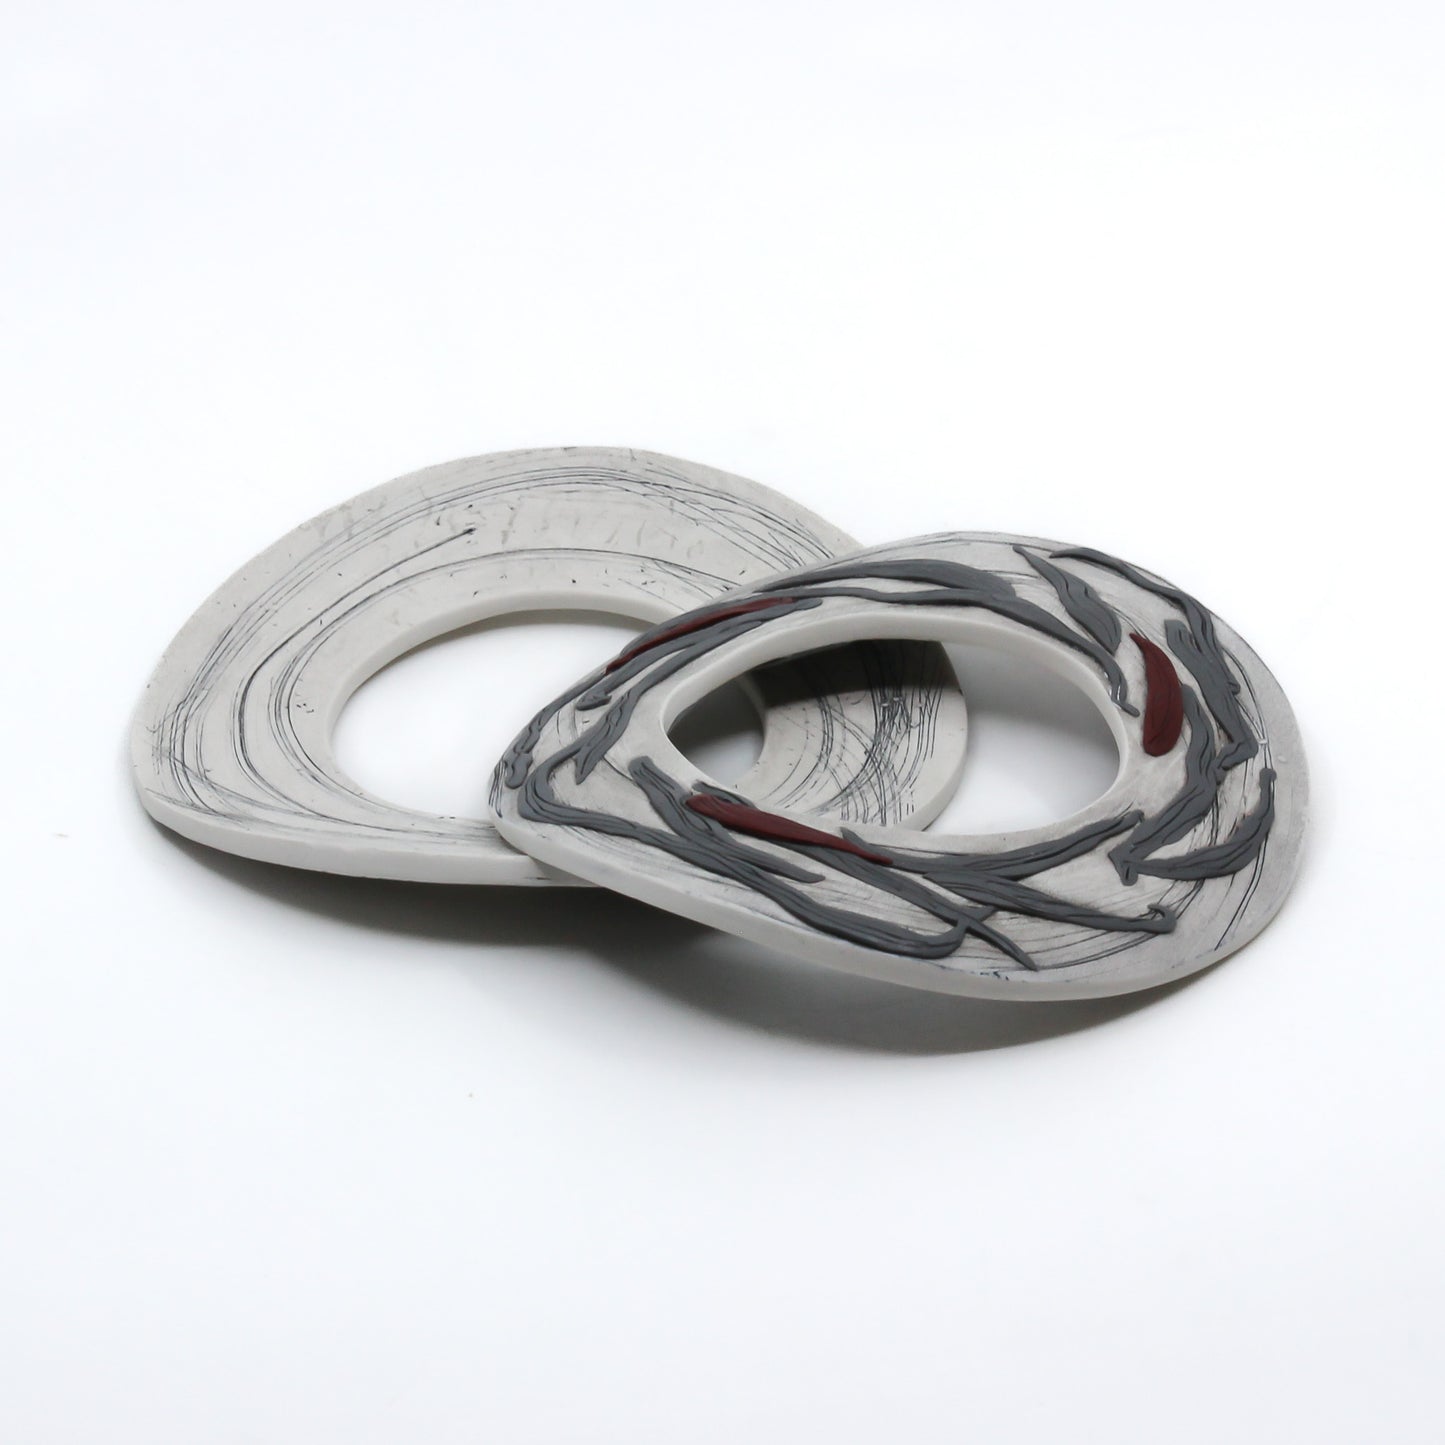 White polymer clay cuffs with grey and red accents